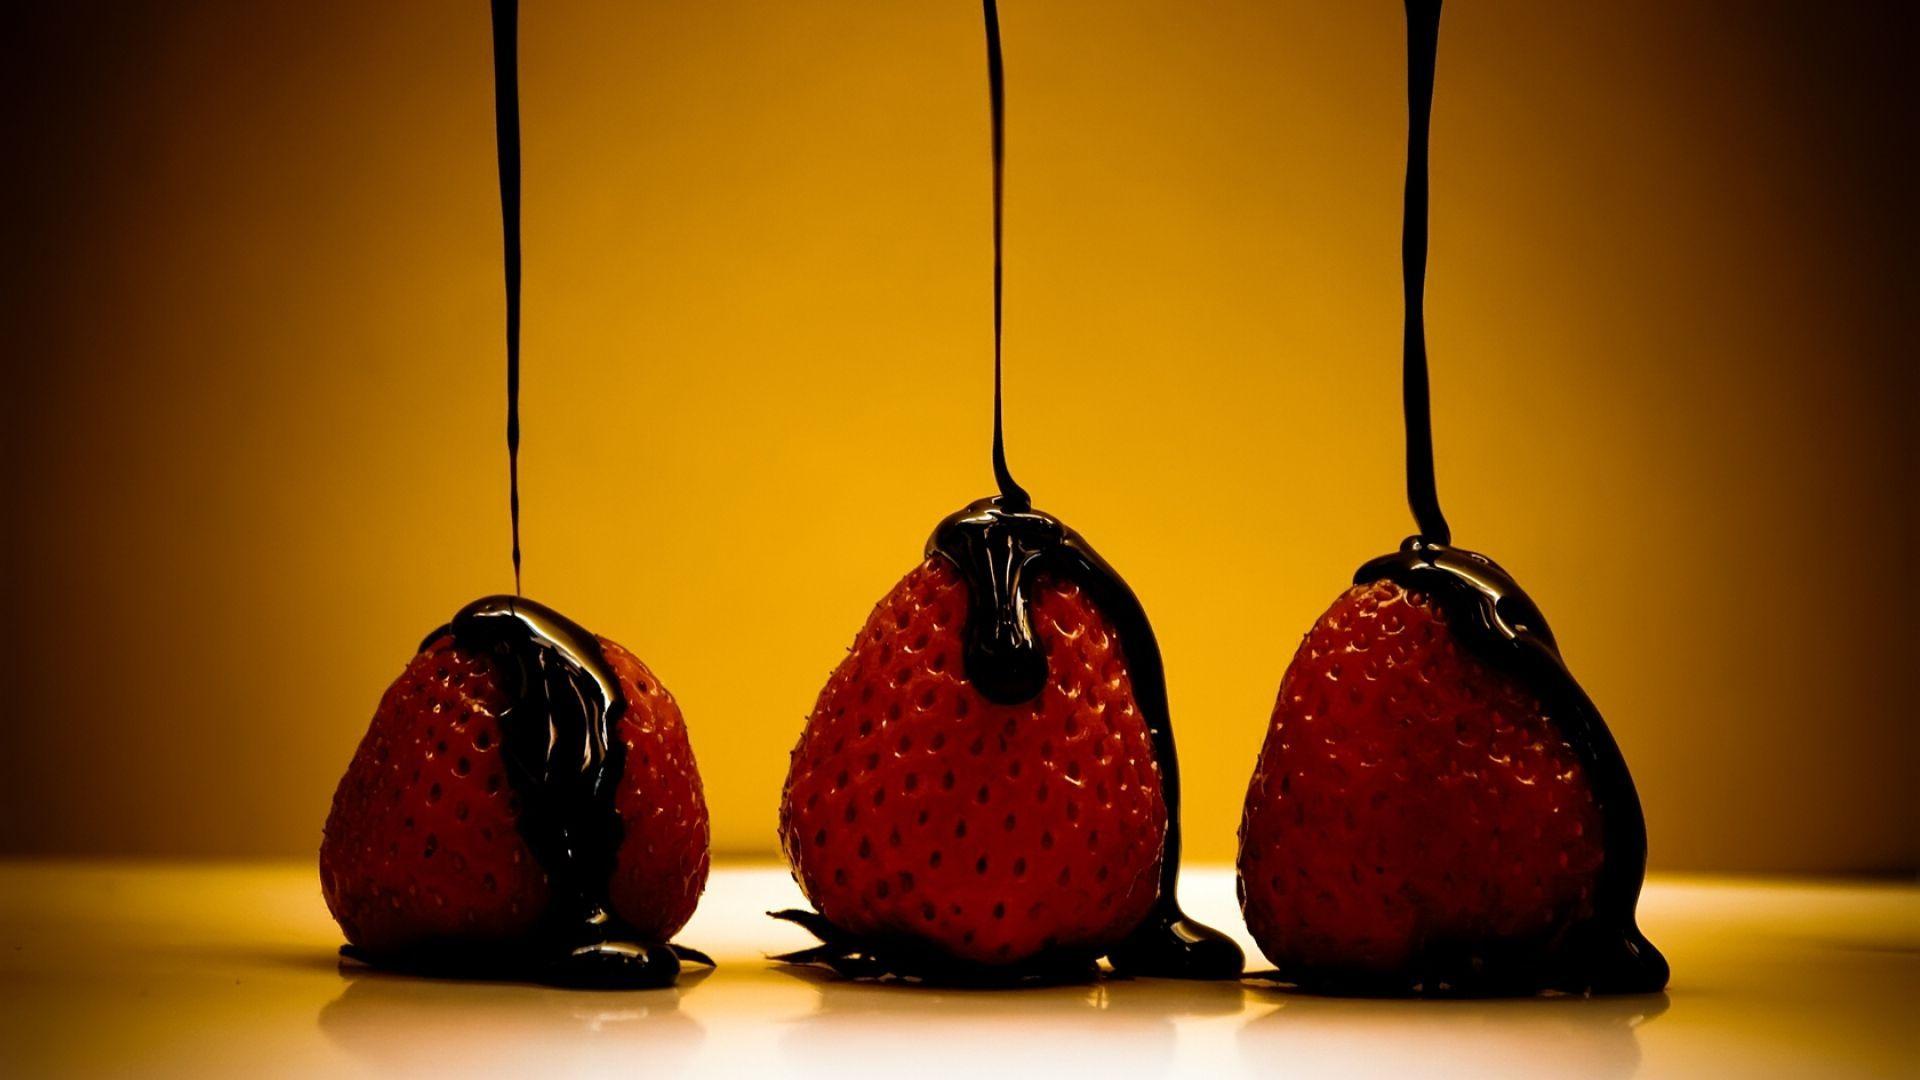 Dark Chocolate Cakes and Strawberries widescreen wallpaper Wide